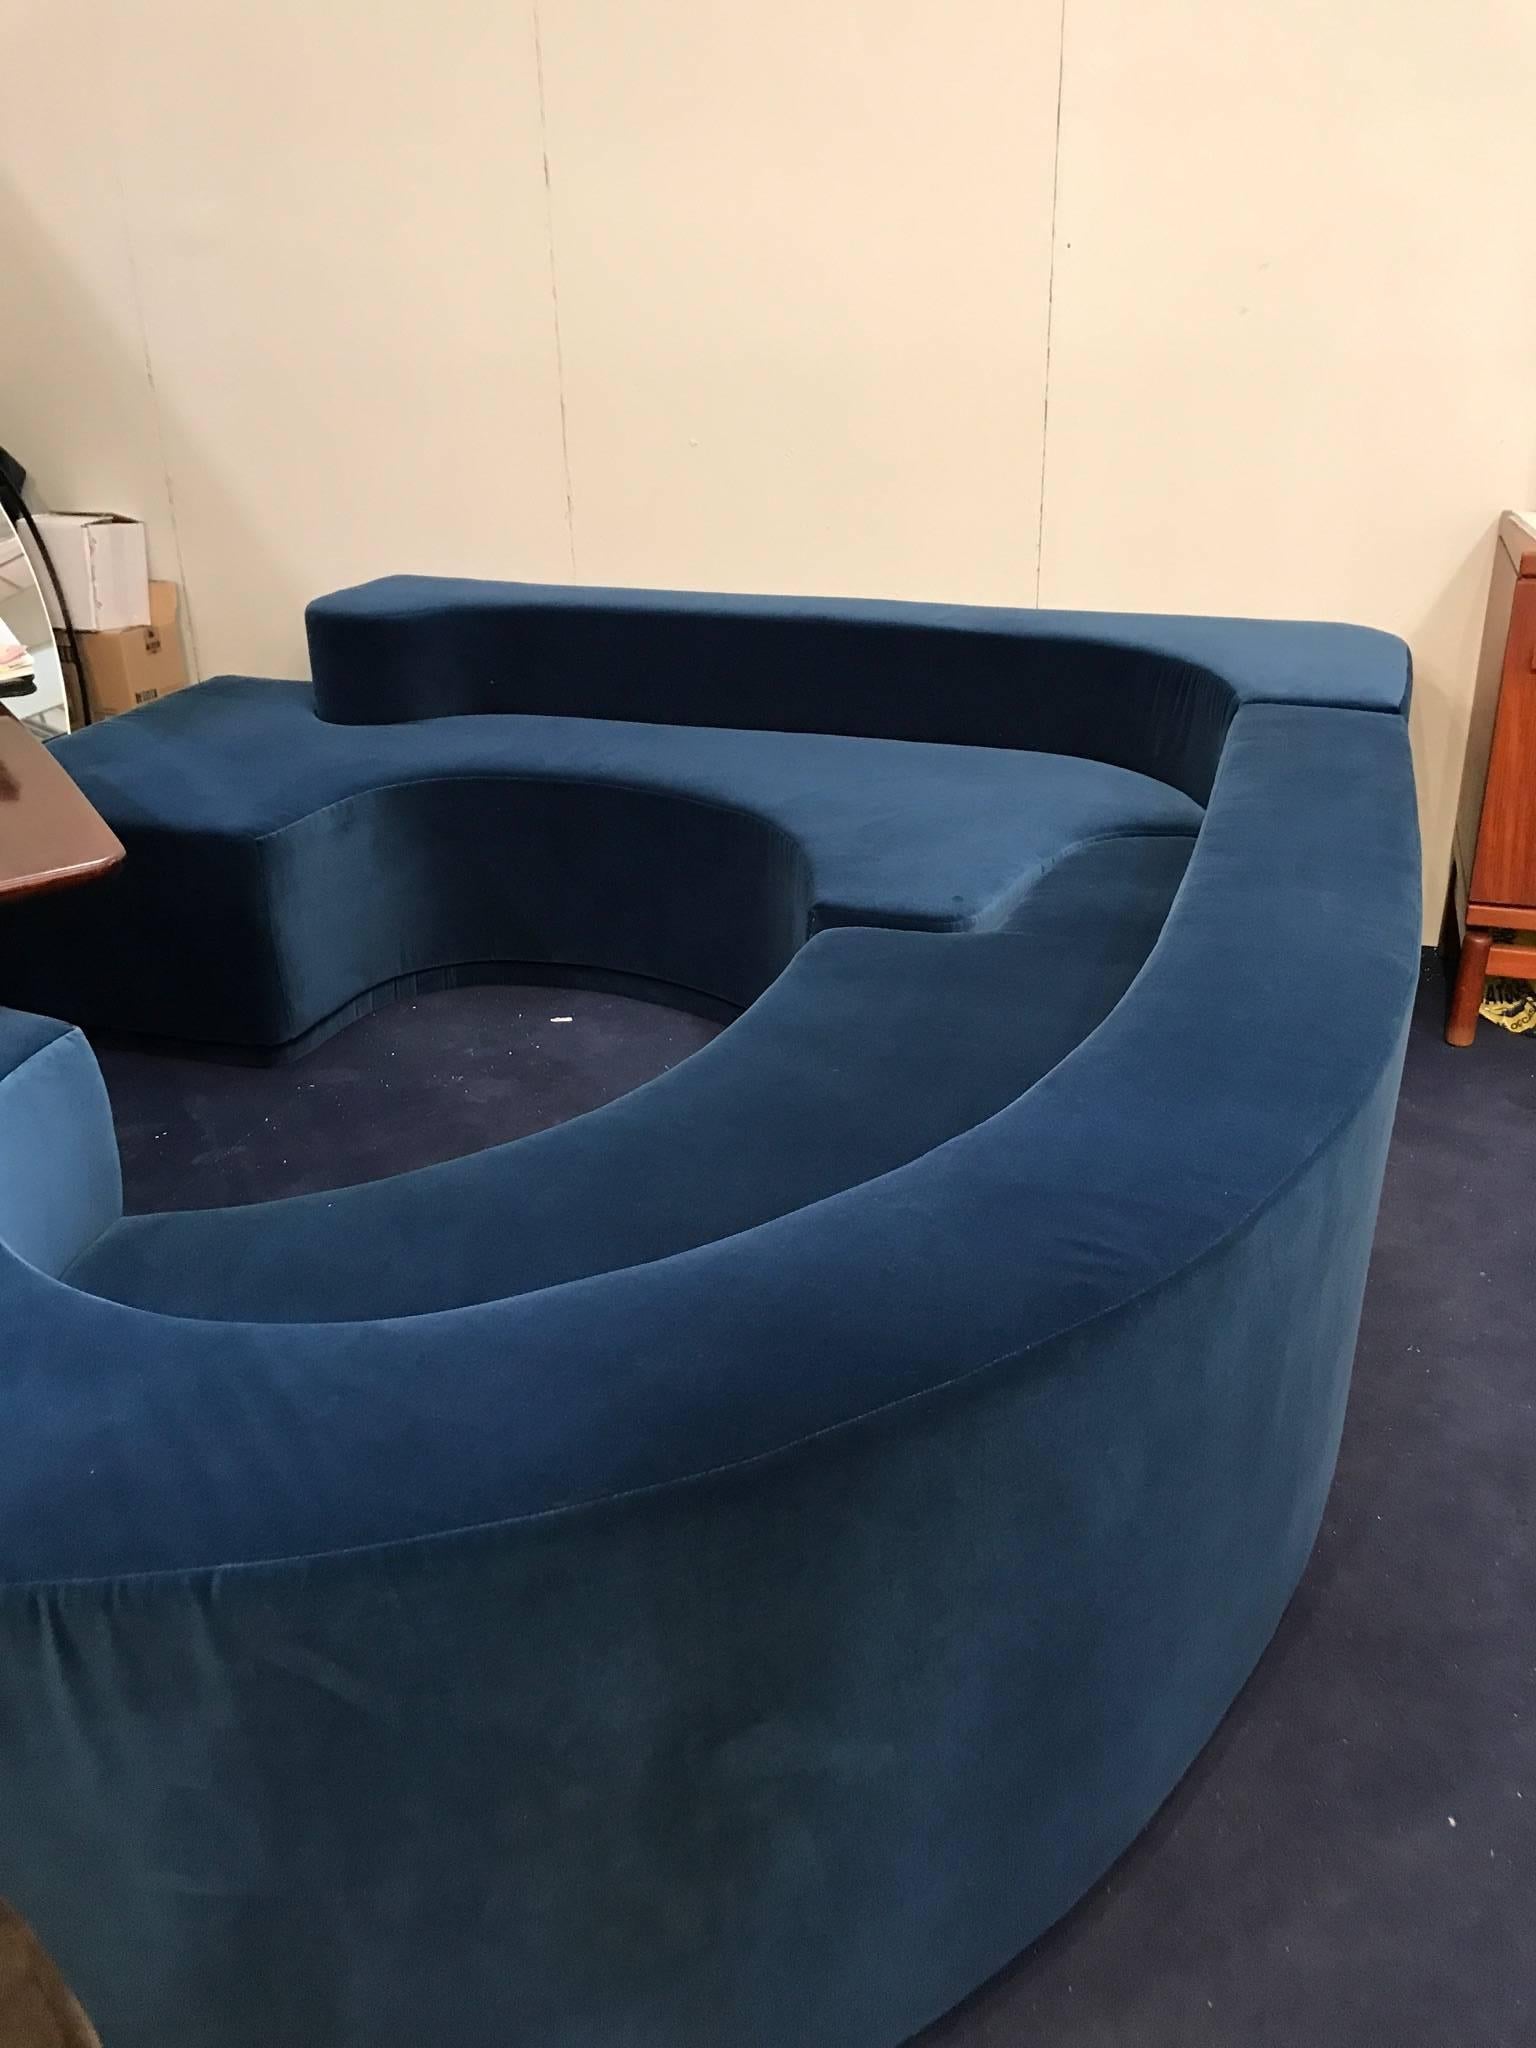 Fantastic and huge blue sofa, in two parts, in excellent condition.